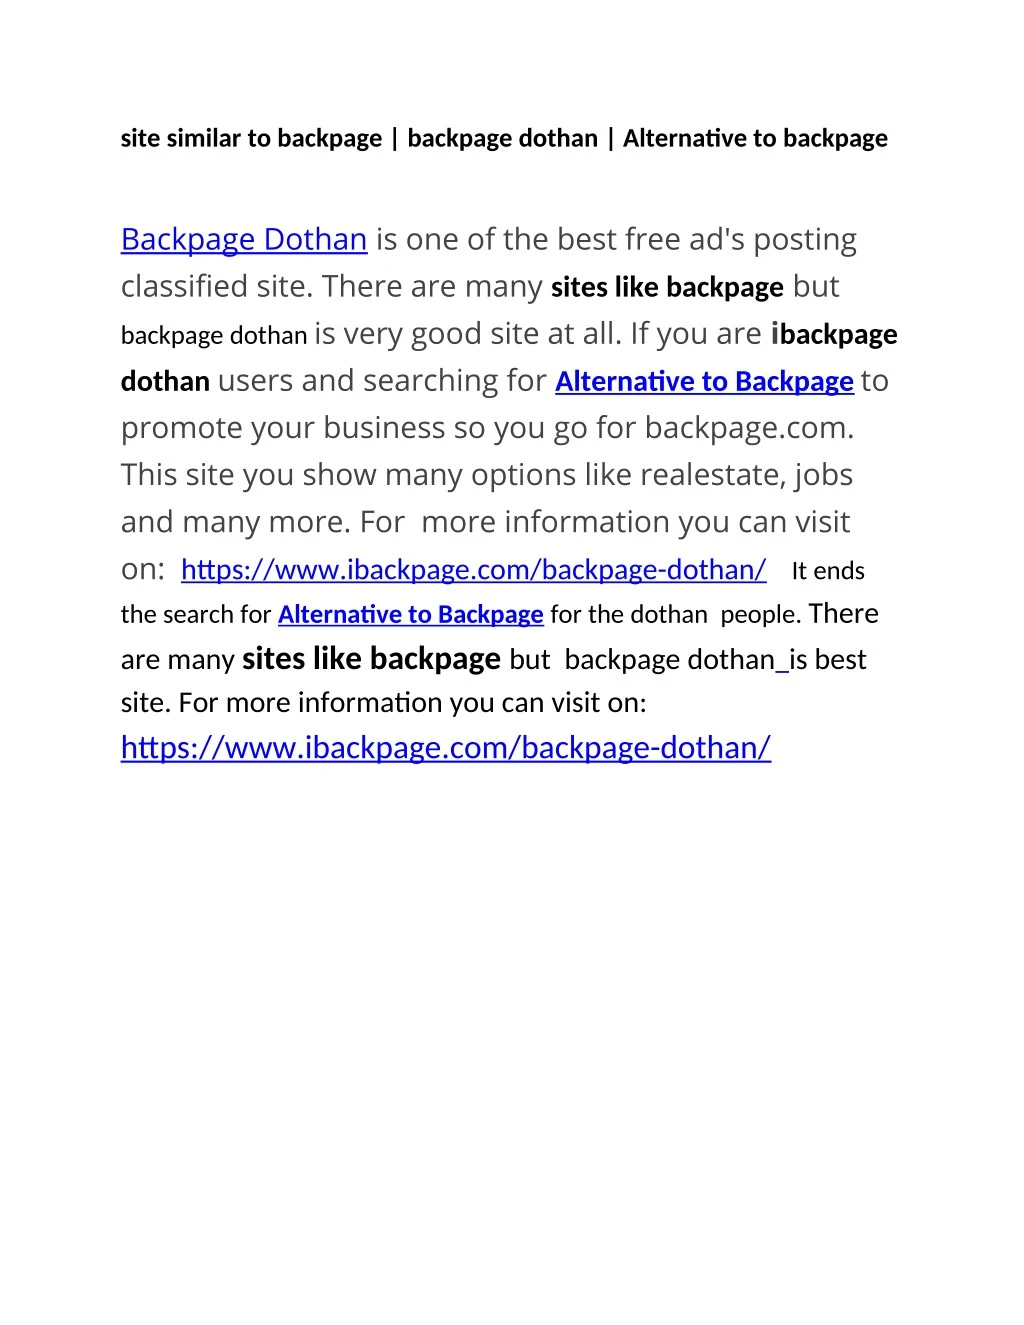 site similar to backpage backpage dothan